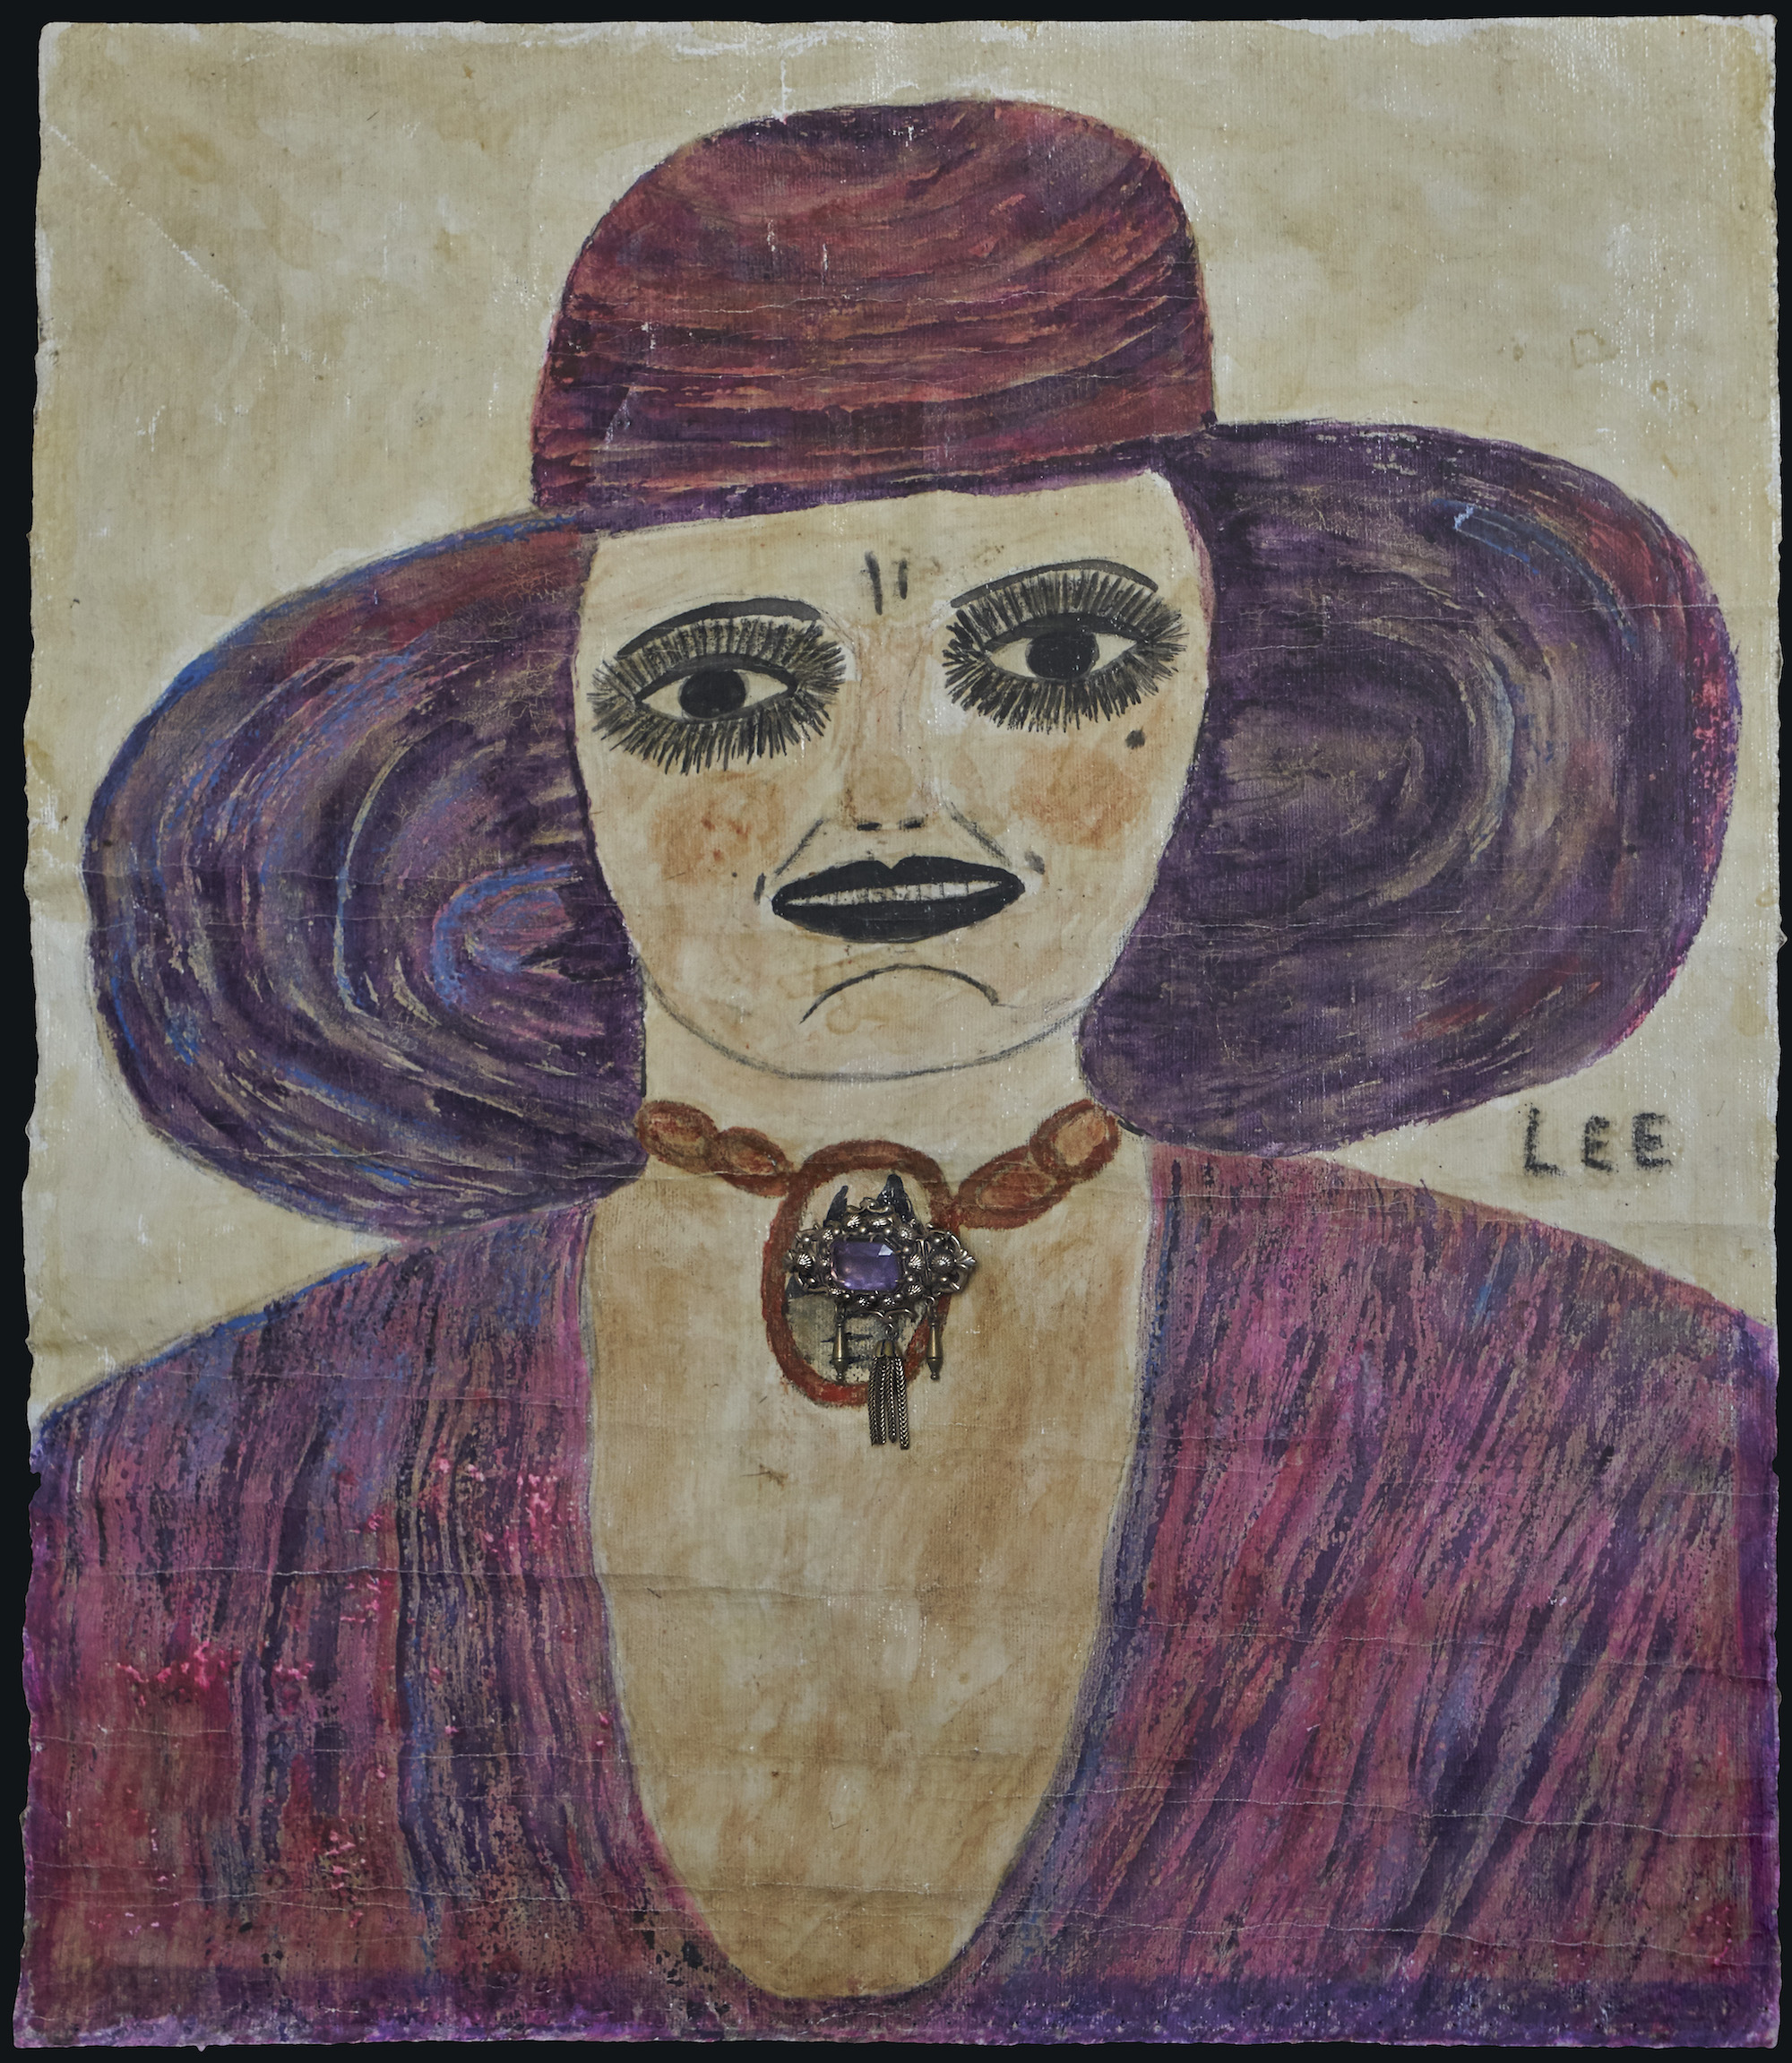 Lee Godie, Untitled (girl/portrait), n.d. Collection of Intuit: The Center for Intuitive and Outsider Art, museum purchase with funds provided by Dale Taylor and Angela Lustig, 2018.1.5. Photo © John Faier